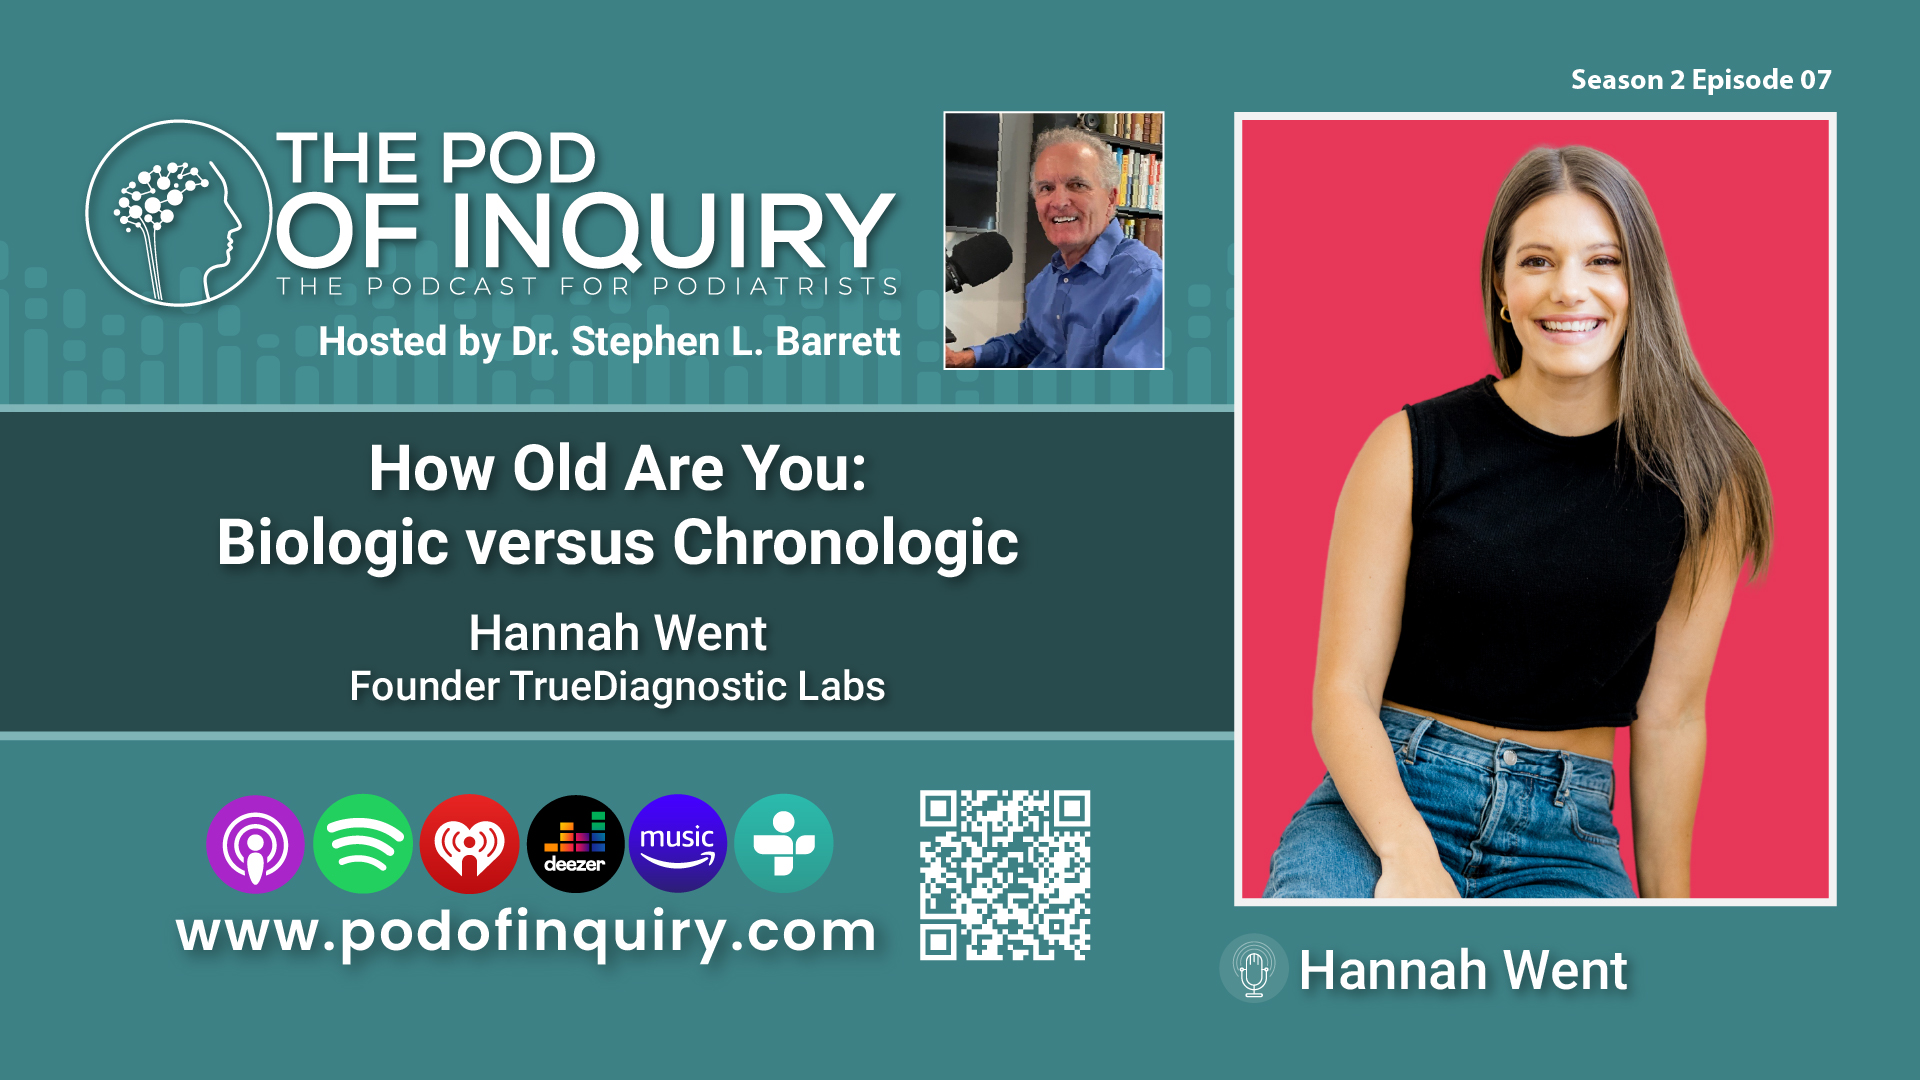 Hannah Went POD of Inquiry - Podcast for Podiatrist